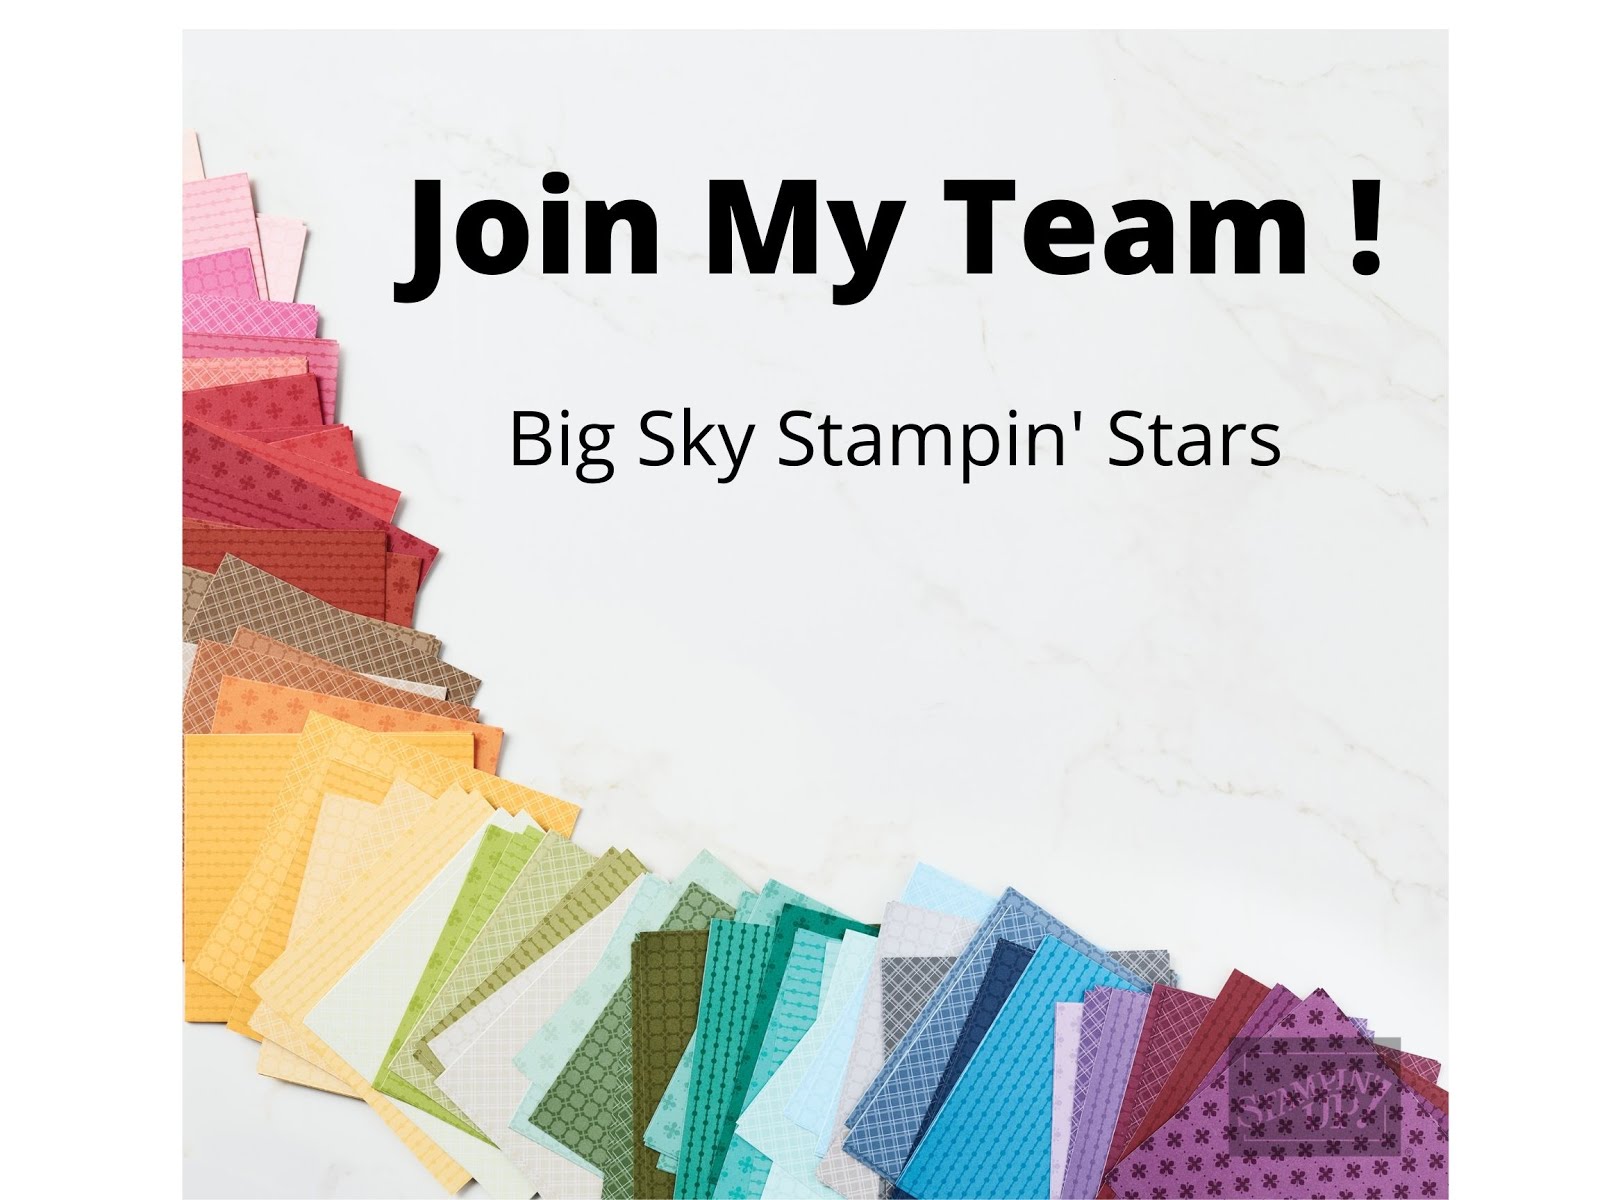 Join My Team!